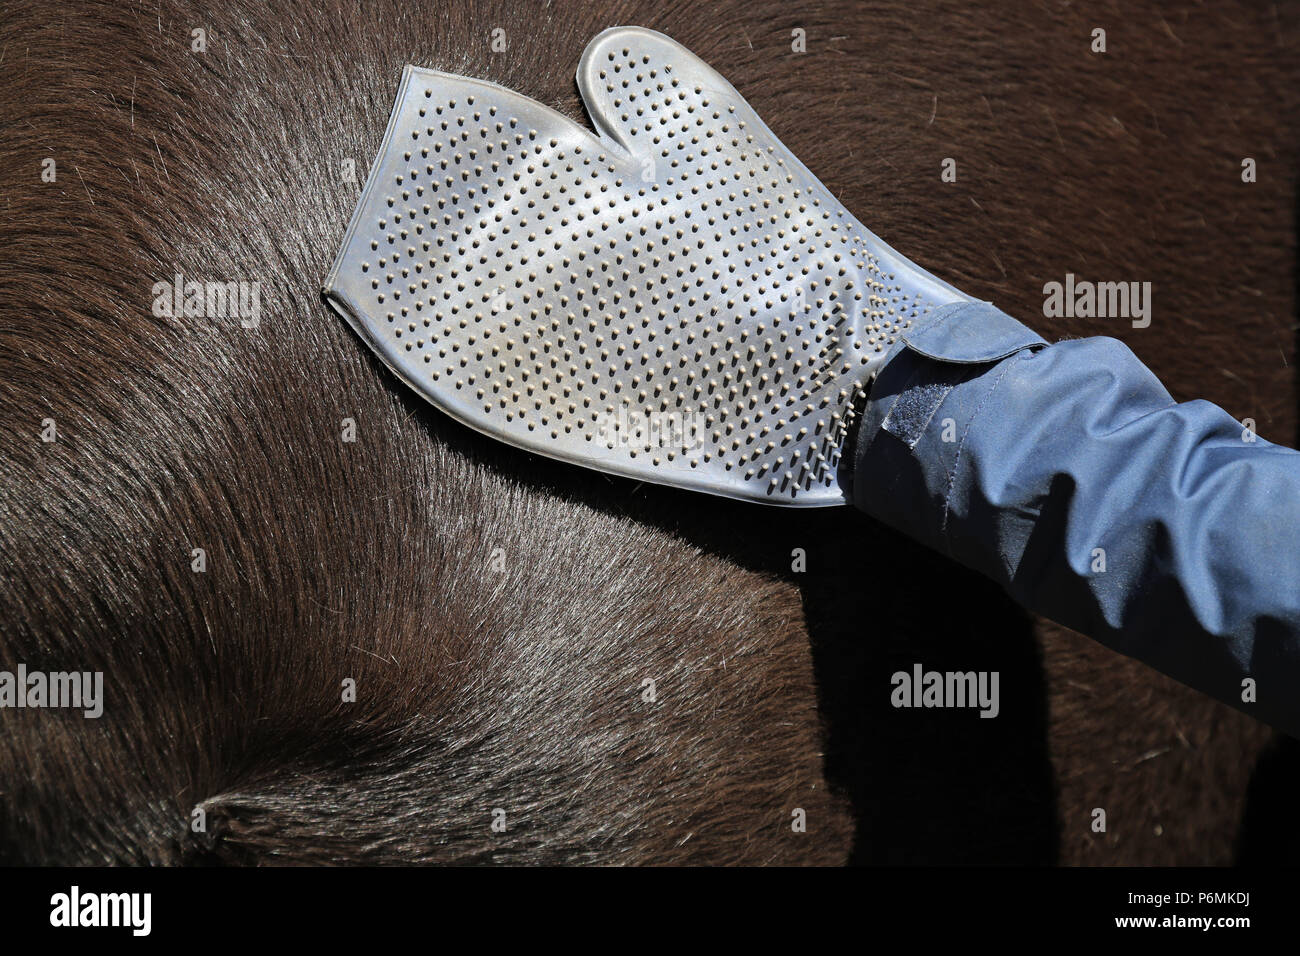 Melbeck, detail, fur of a horse is groomed with a cleaning glove made of rubber Stock Photo